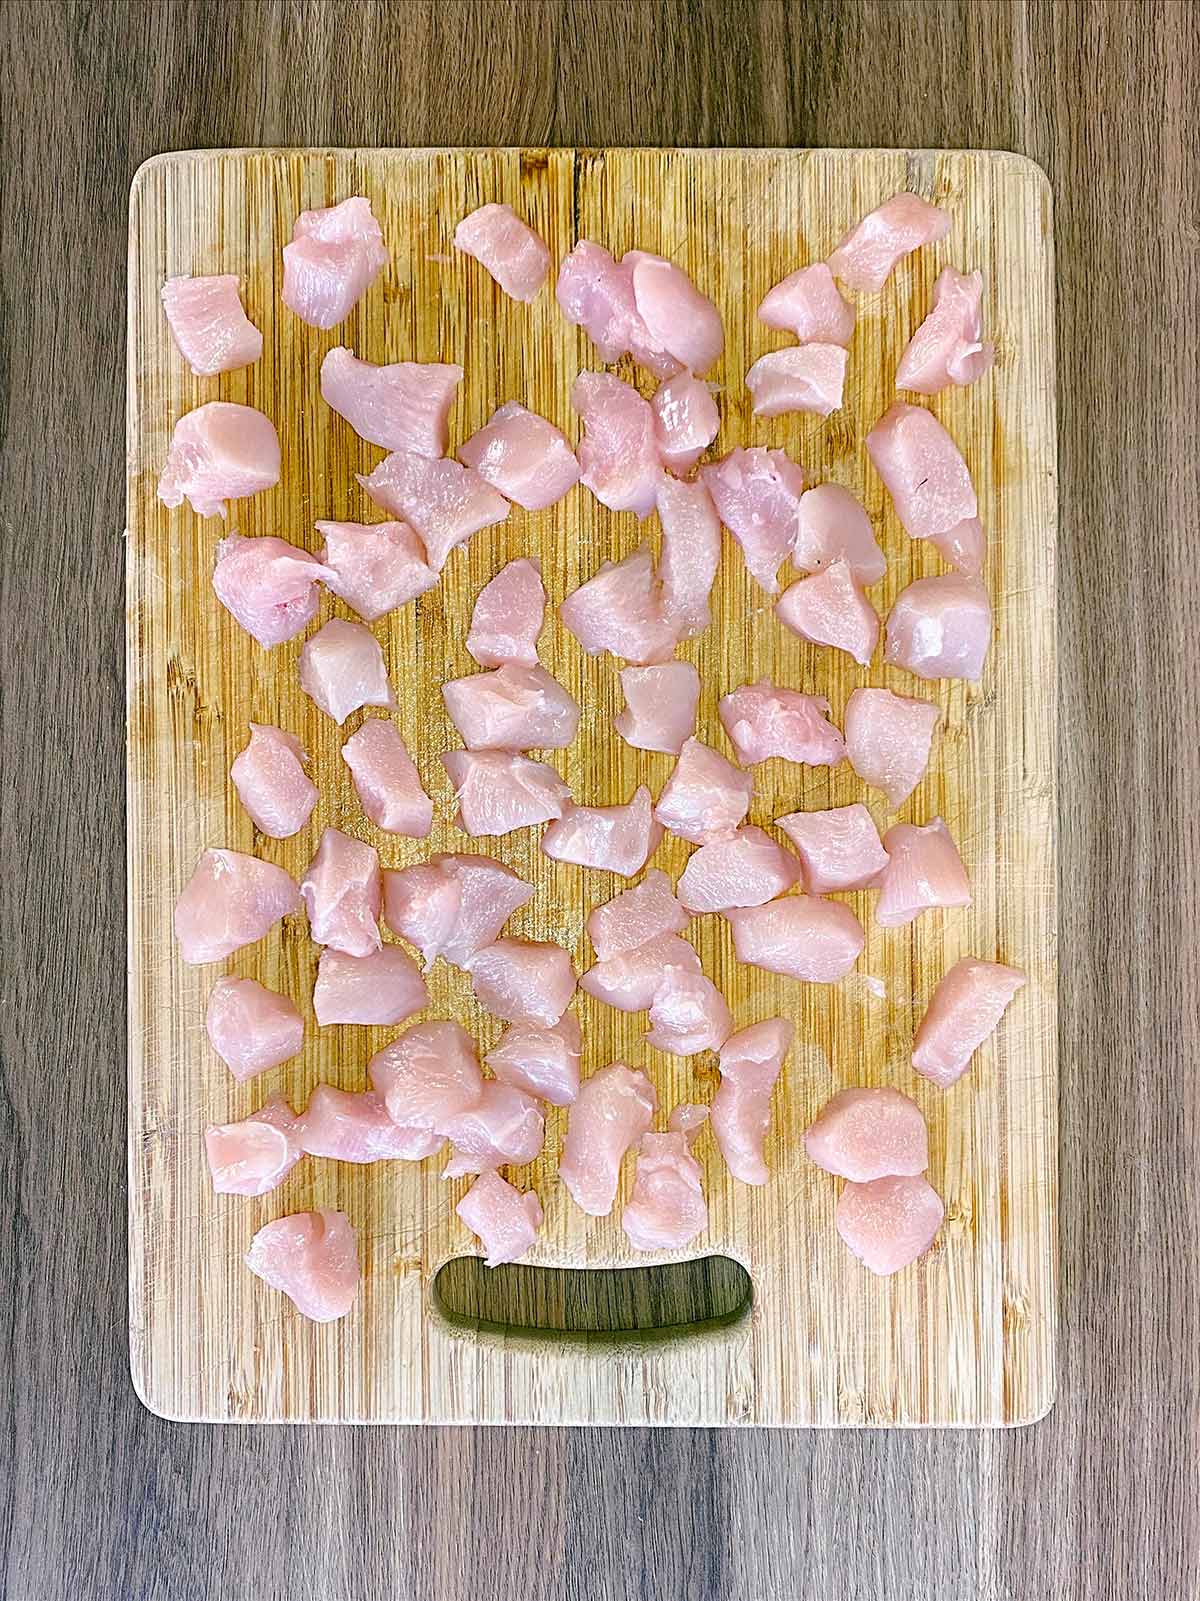 Small cubes of diced chicken on a wooden chopping board.